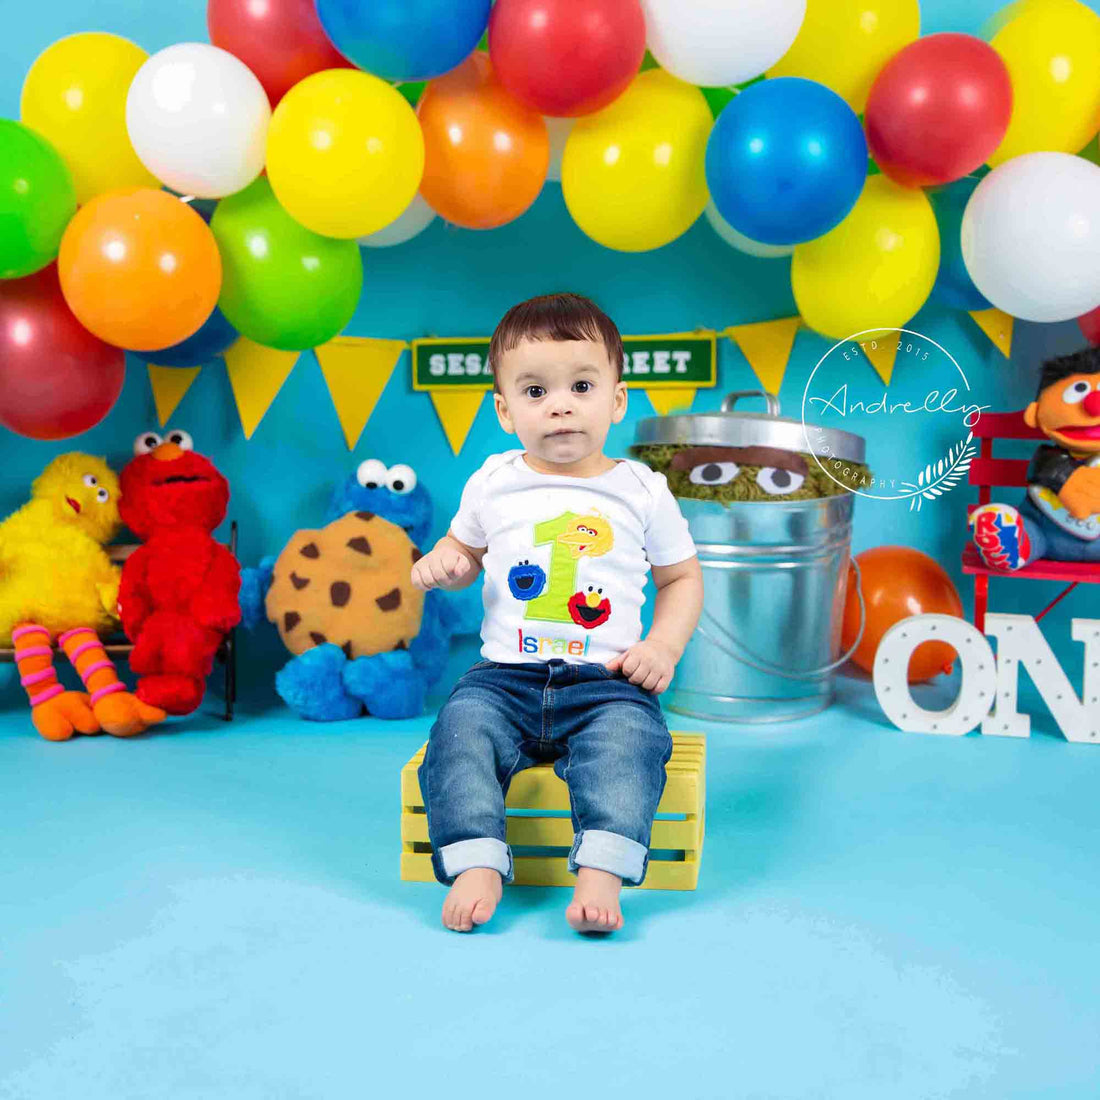 Baby Photography: How to DIY Sesame Street Cake Smash Session